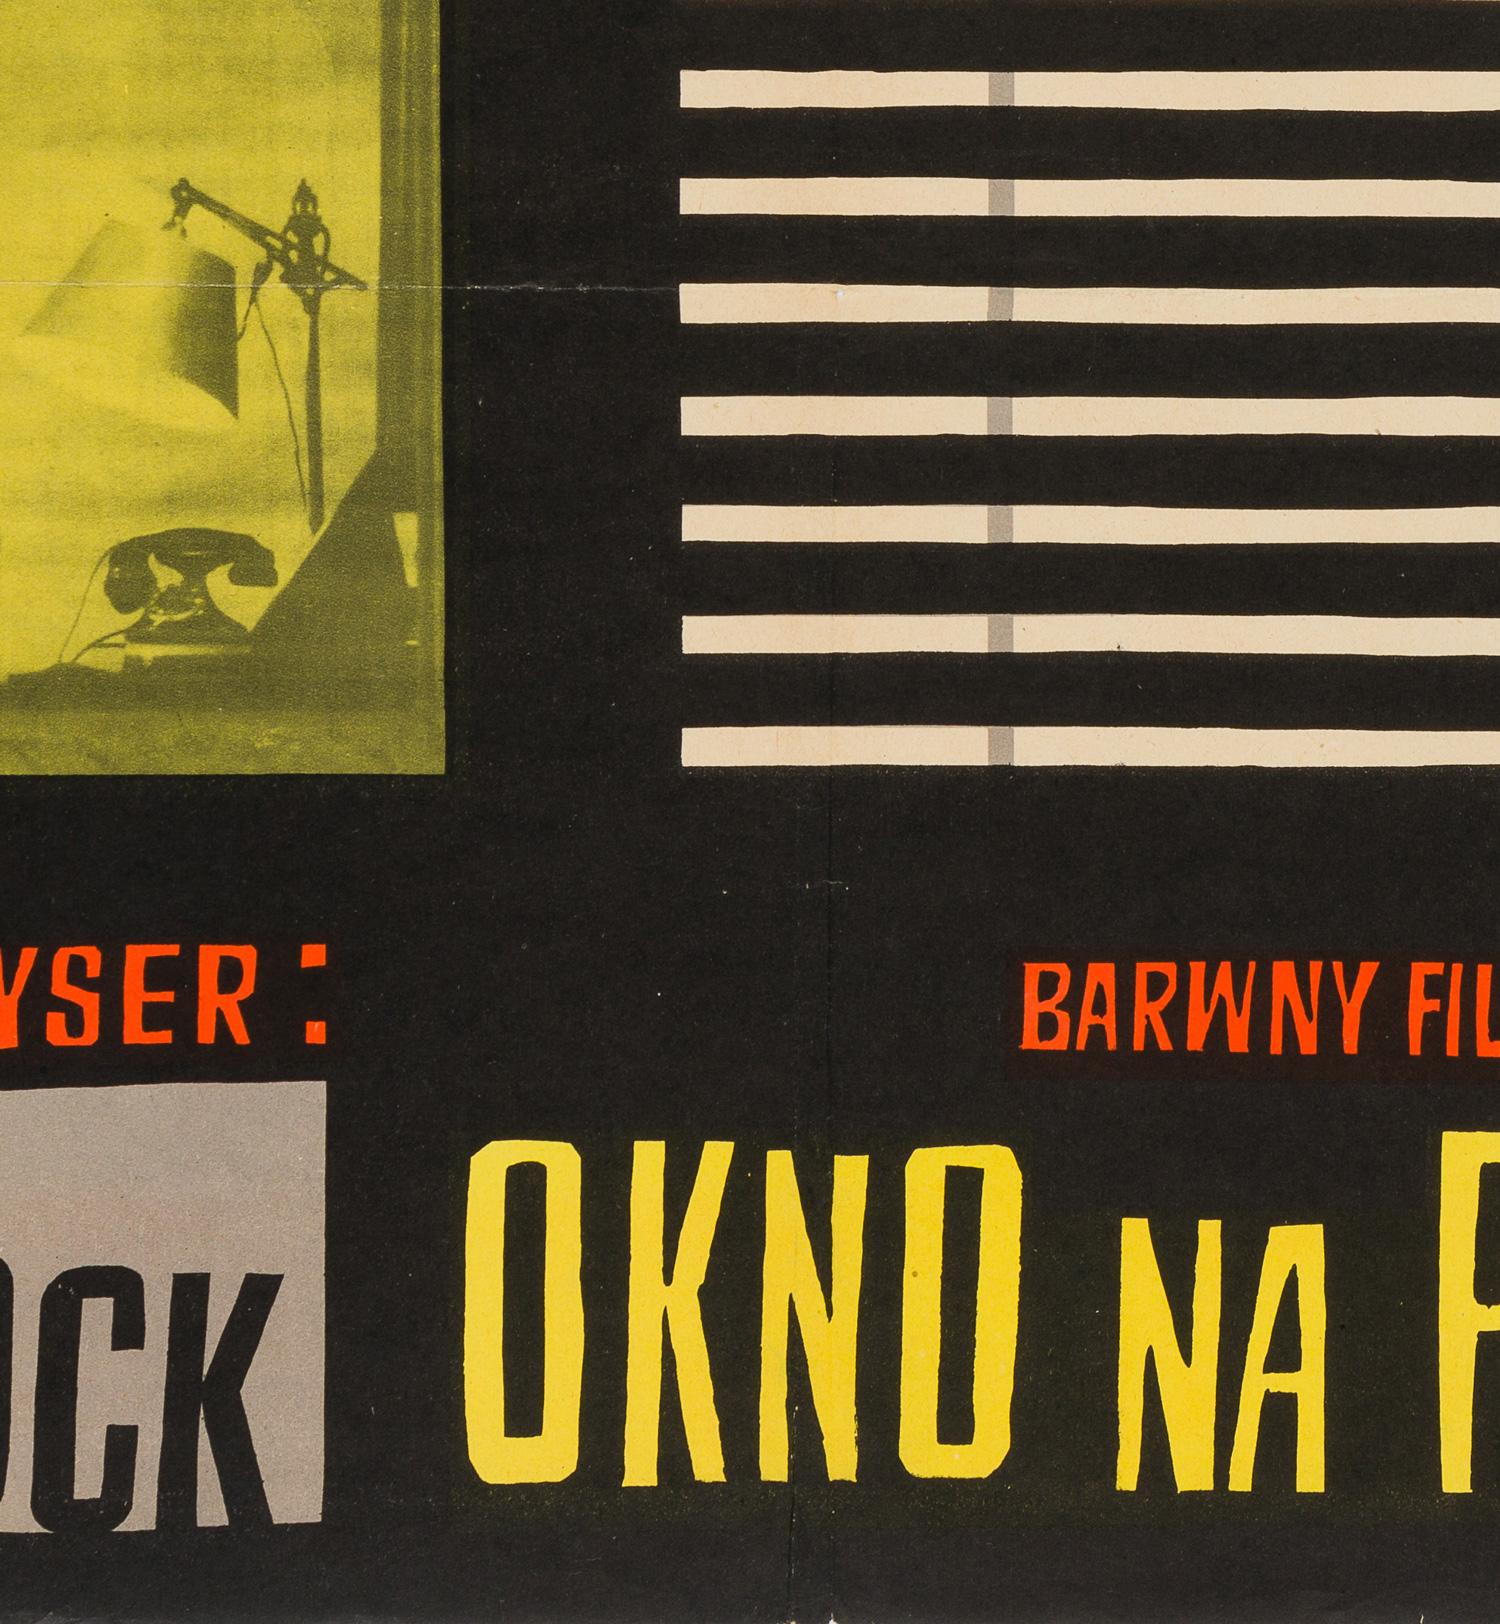 Rear Window Original Polish Film Poster, Witold Janowski, 1958 In Good Condition For Sale In Bath, Somerset